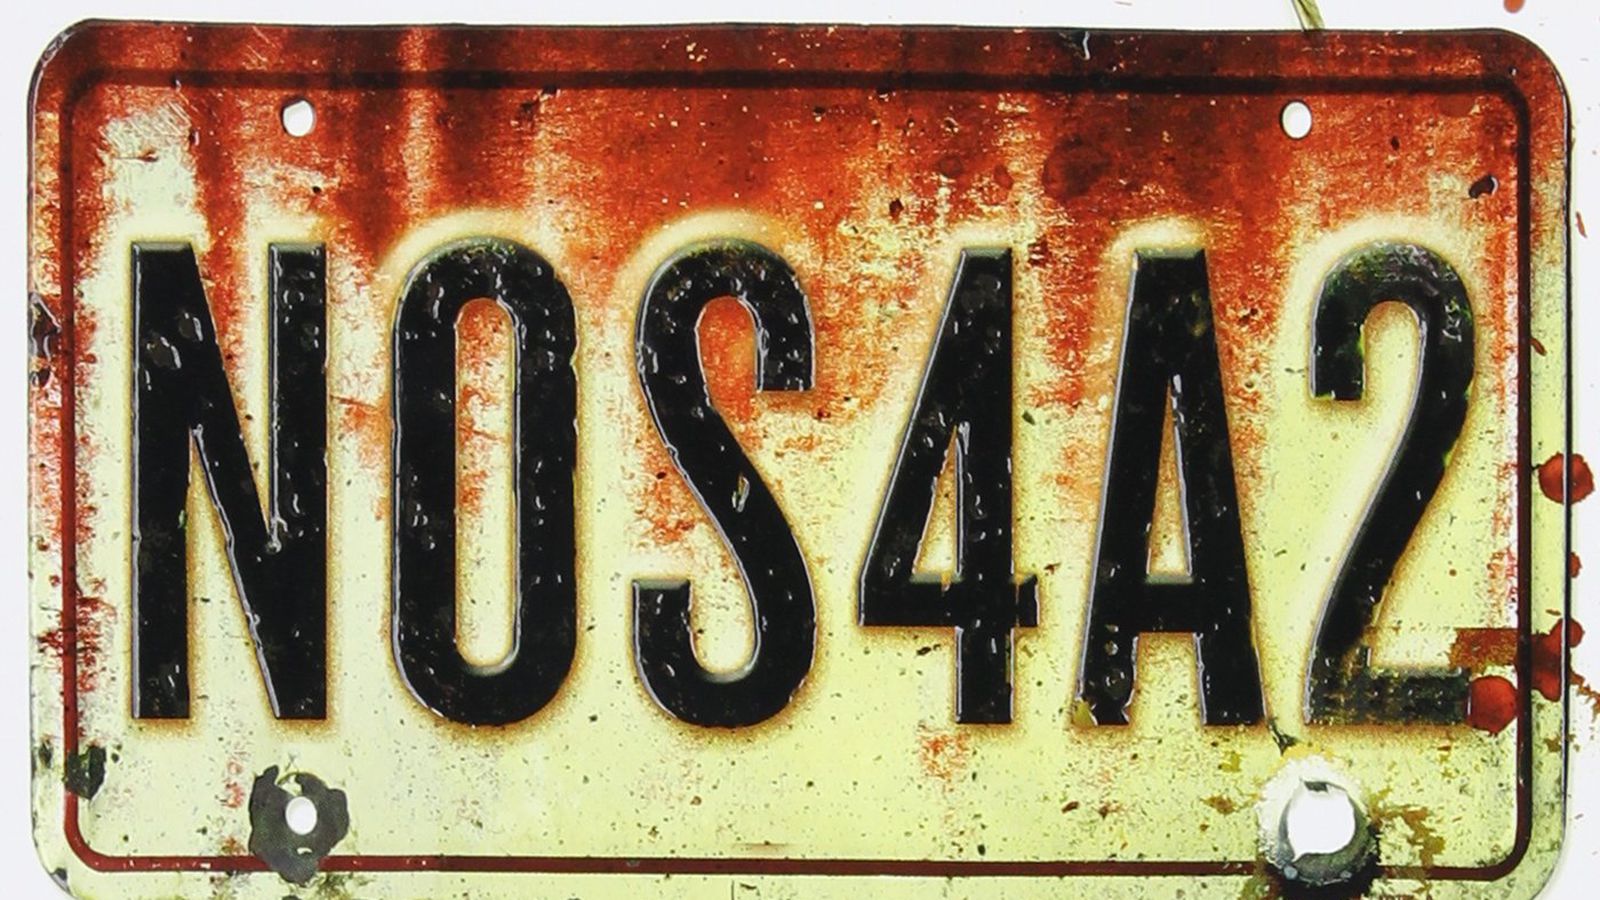 Nos4A2 Poster Wallpapers